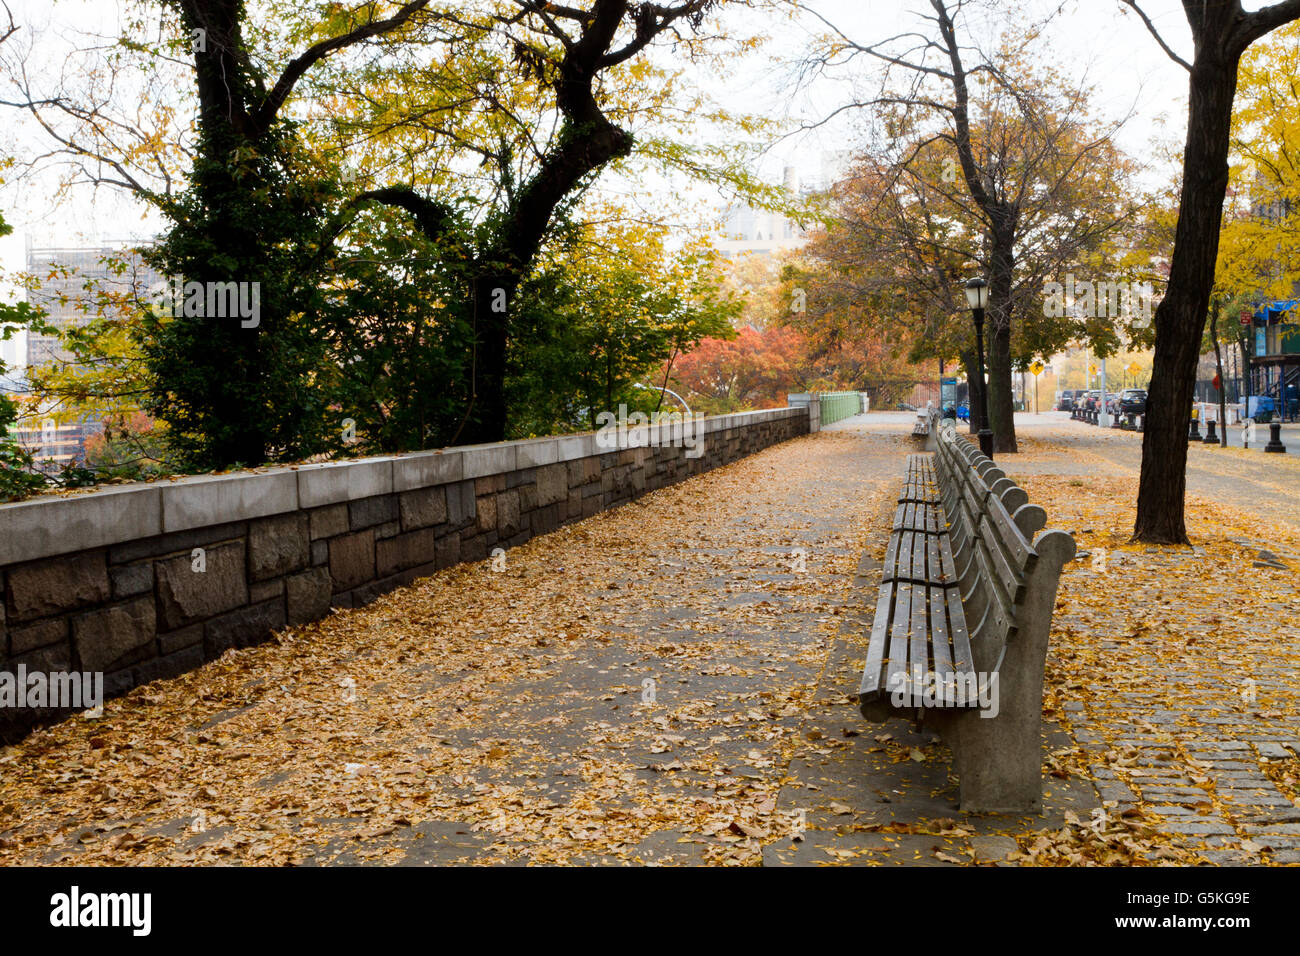 Park bench Alamy images hi-res nyc - stock and photography